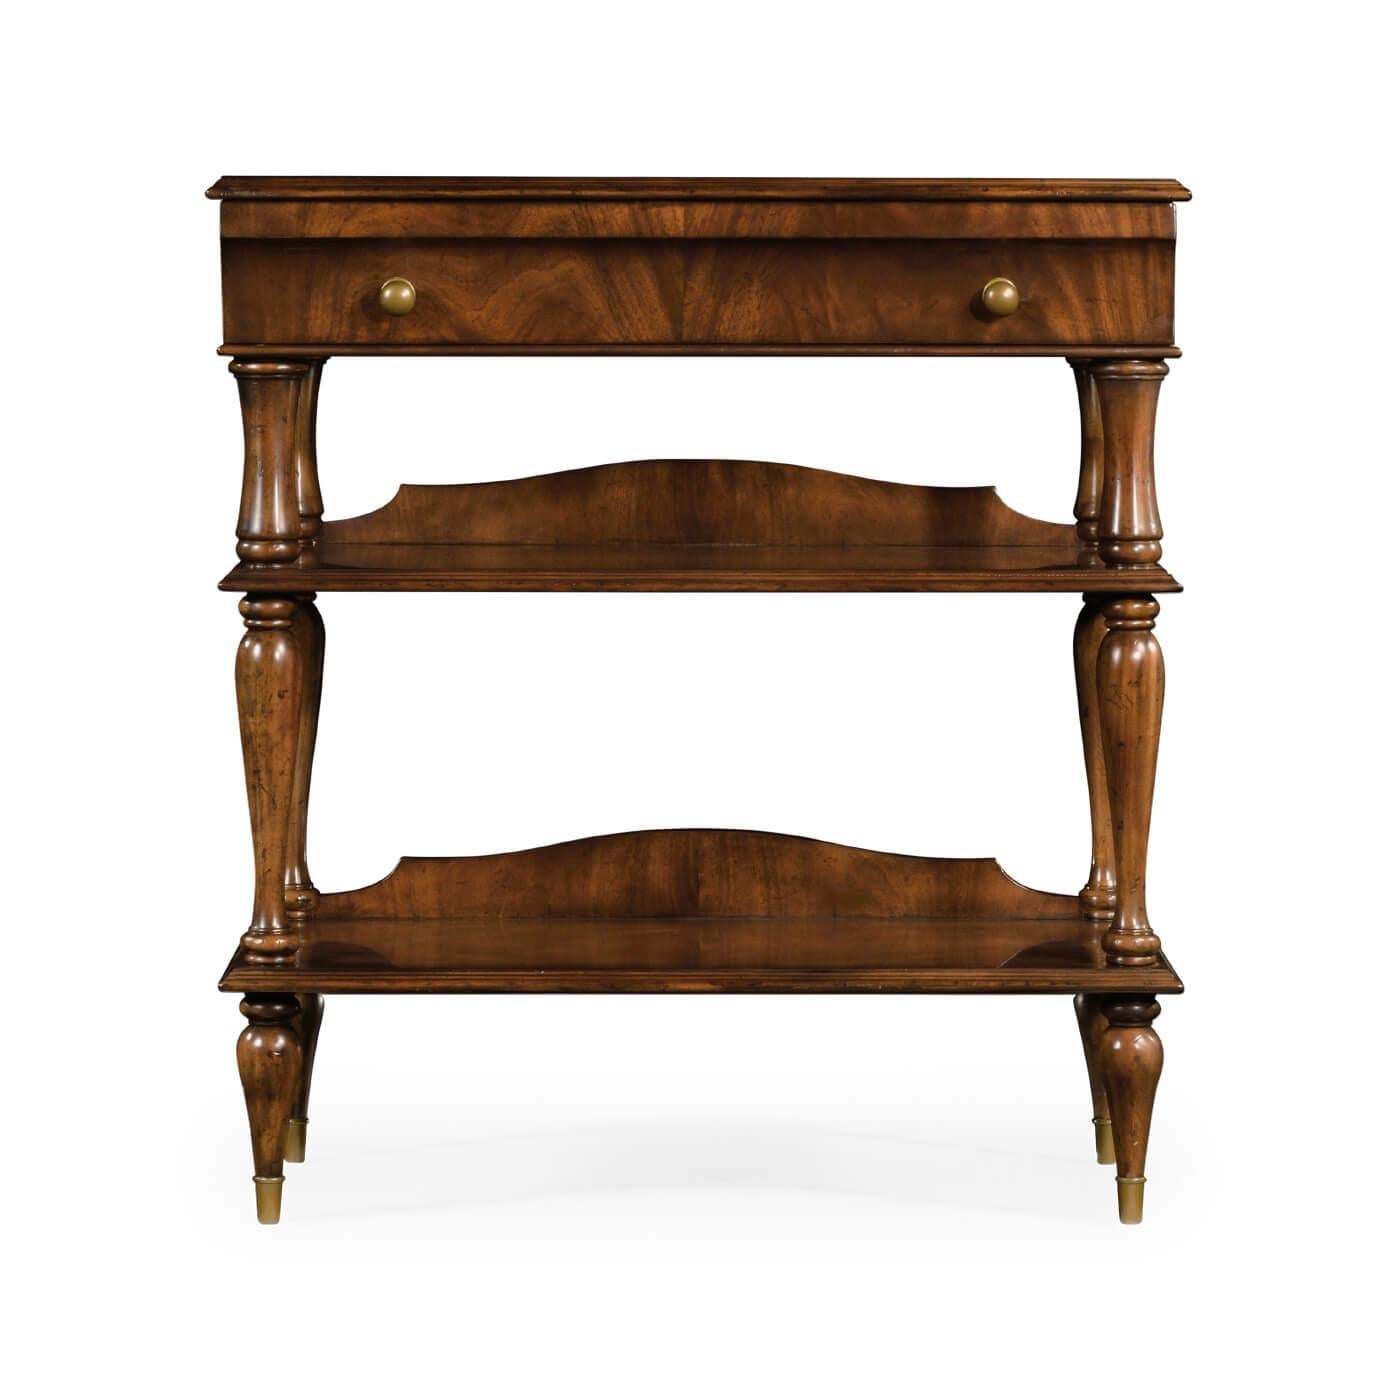 French Directoire style mahogany nightstand with figured mahogany veneers, a molded edge above a single long drawer, two lower shelves with molded edges and supported by shaped and turned legs on turned taupee feet with brass knob handles and